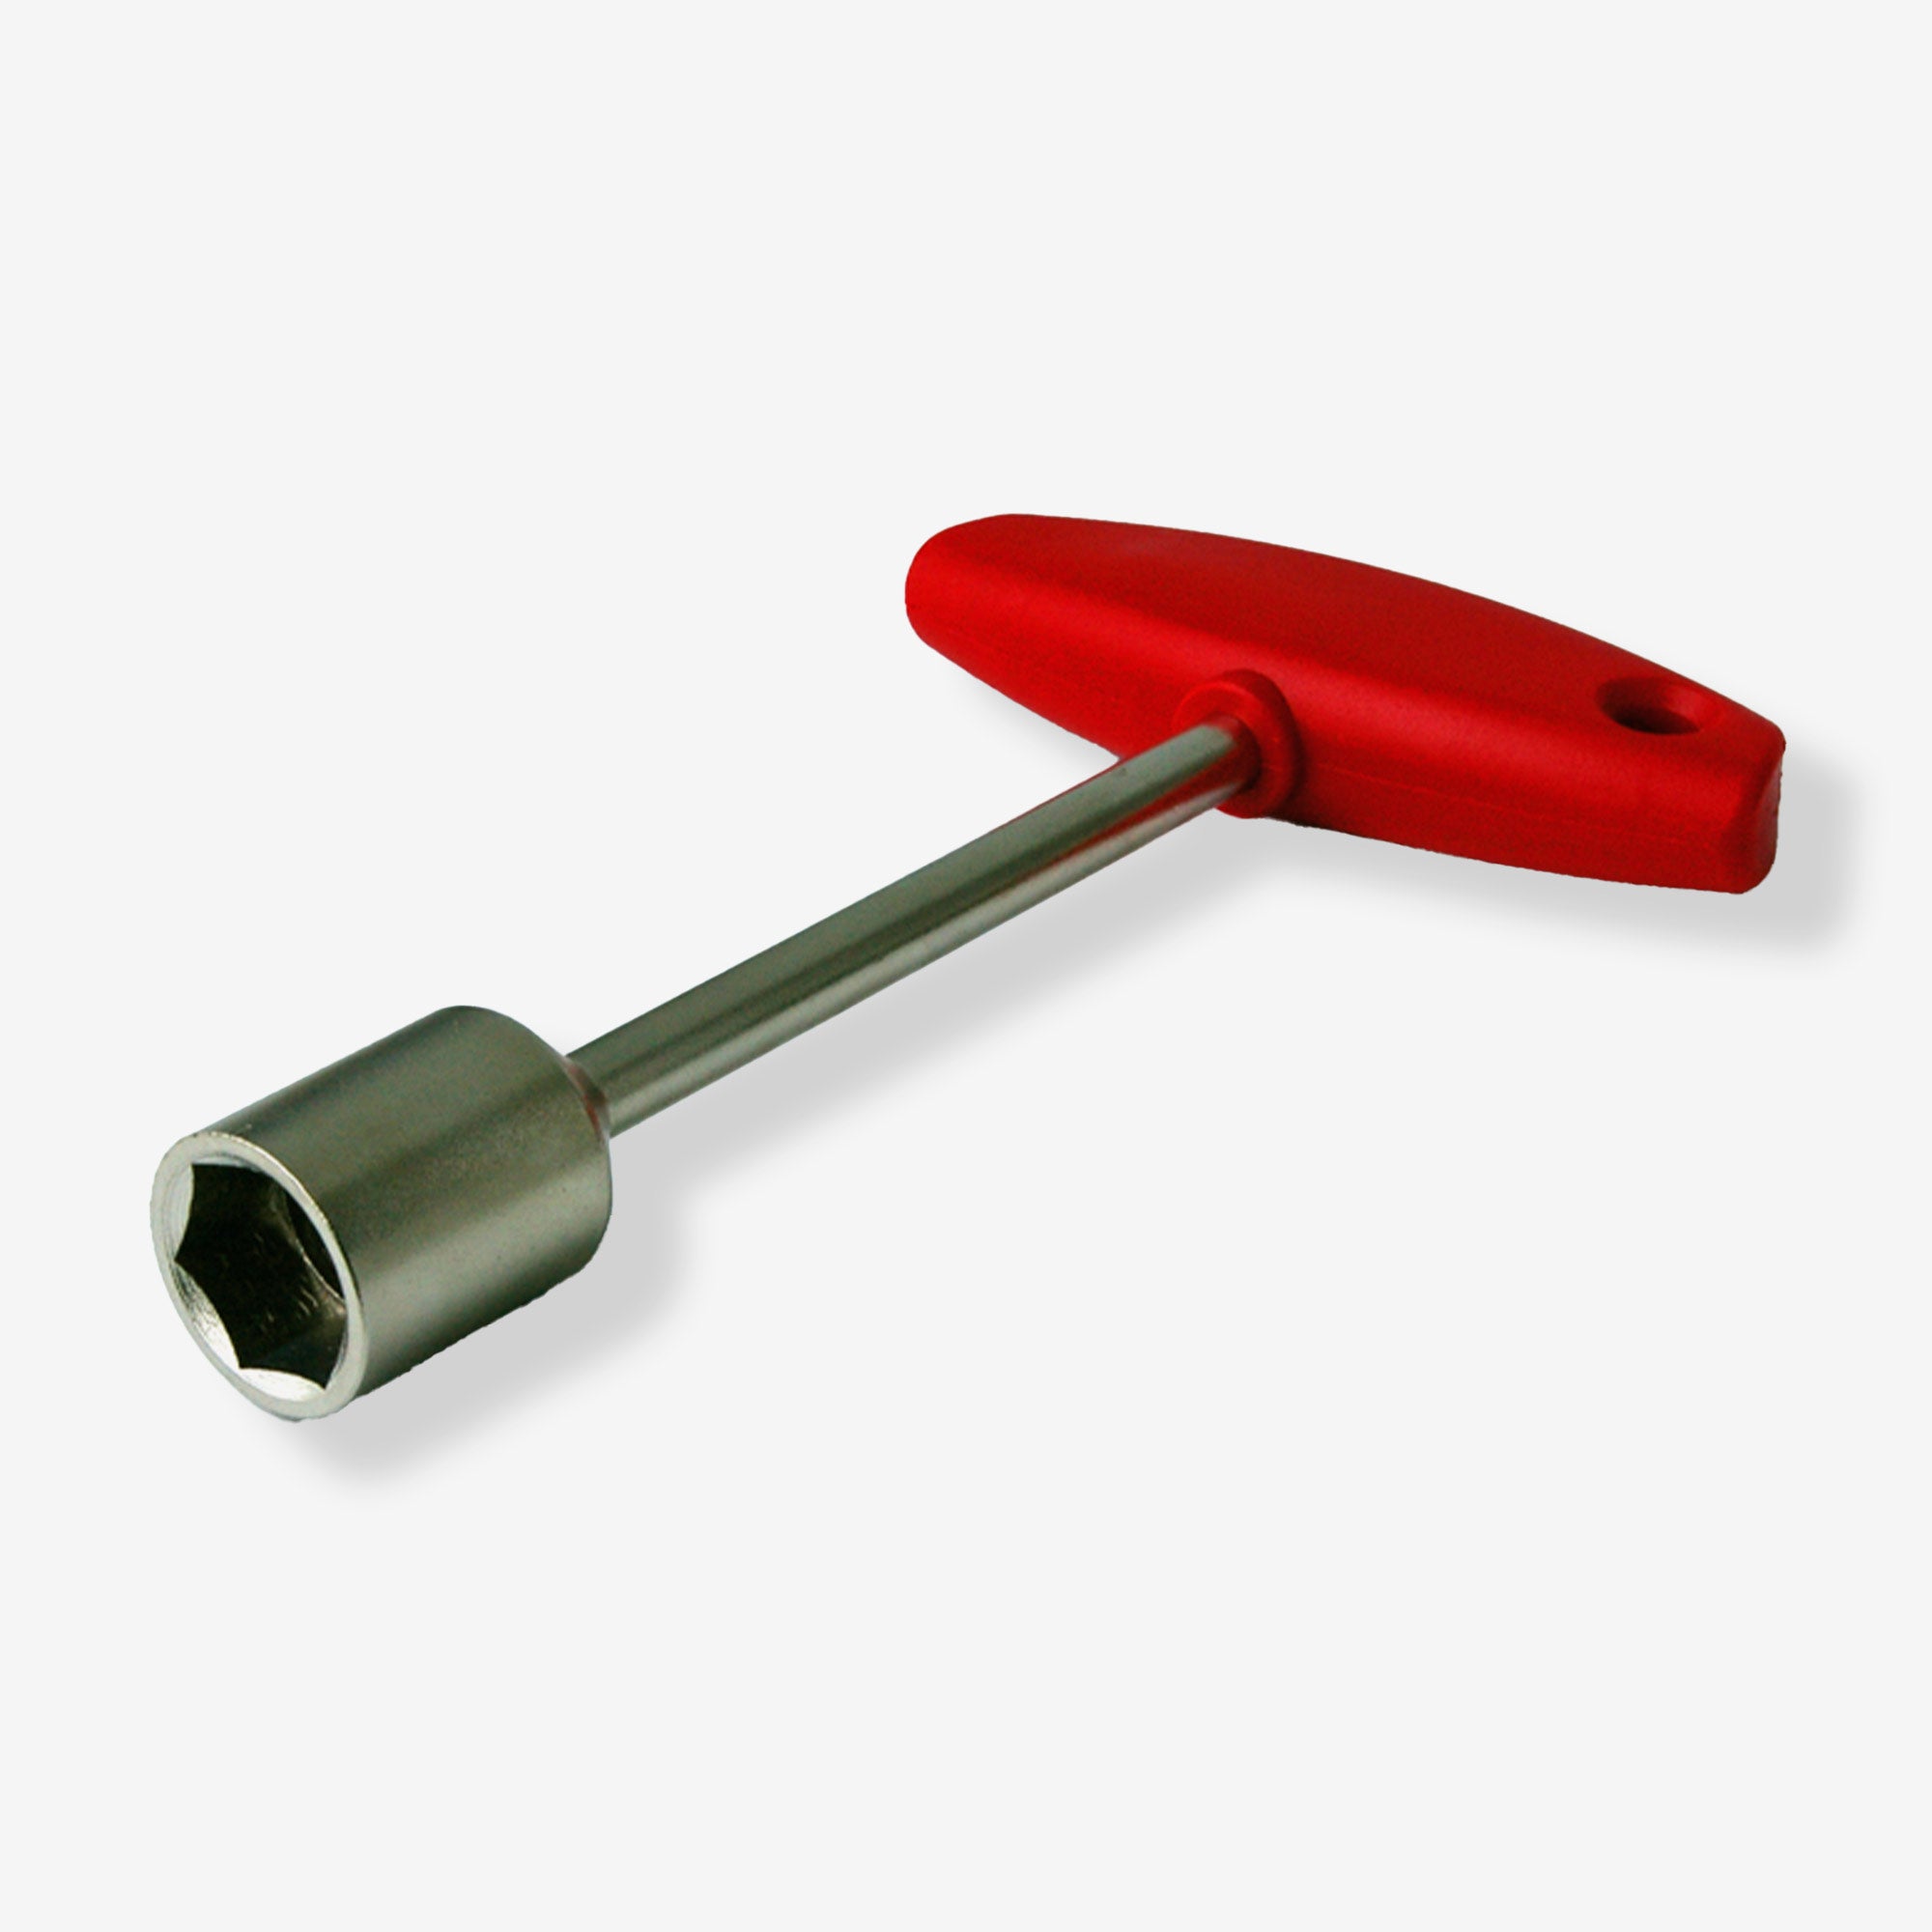 Square T-spanner size 10 mm